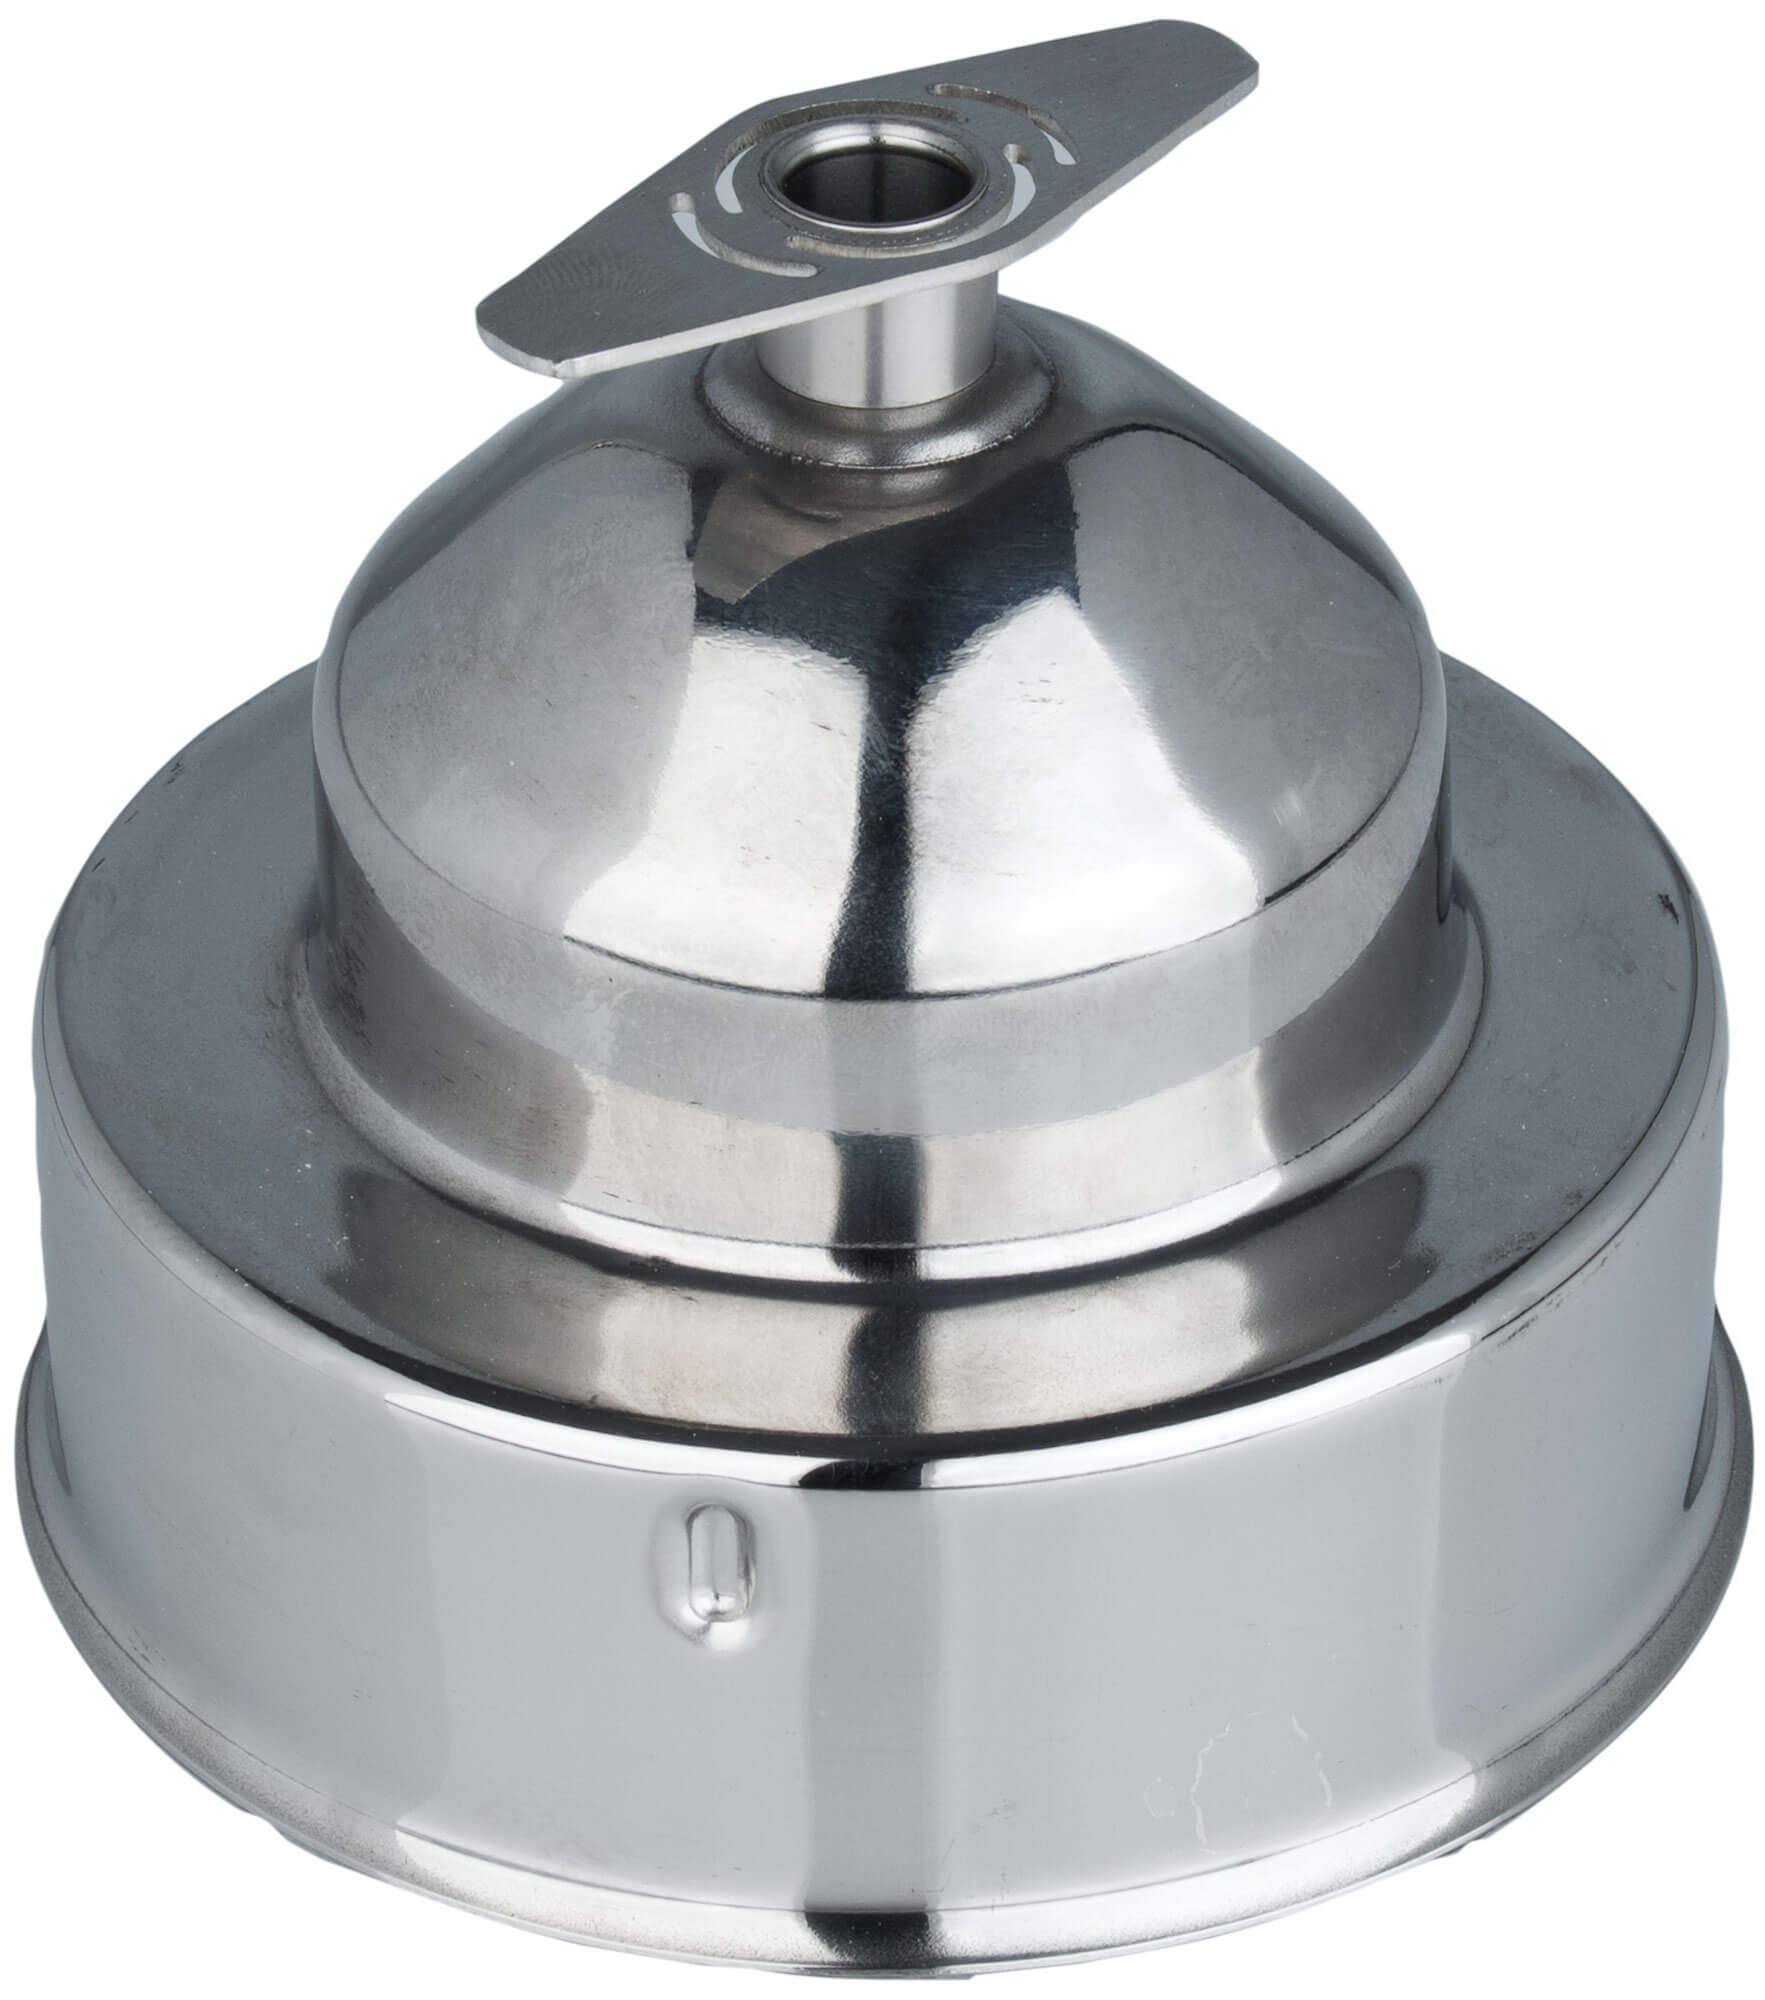 Bowl - spare part for Cancan manual juicer